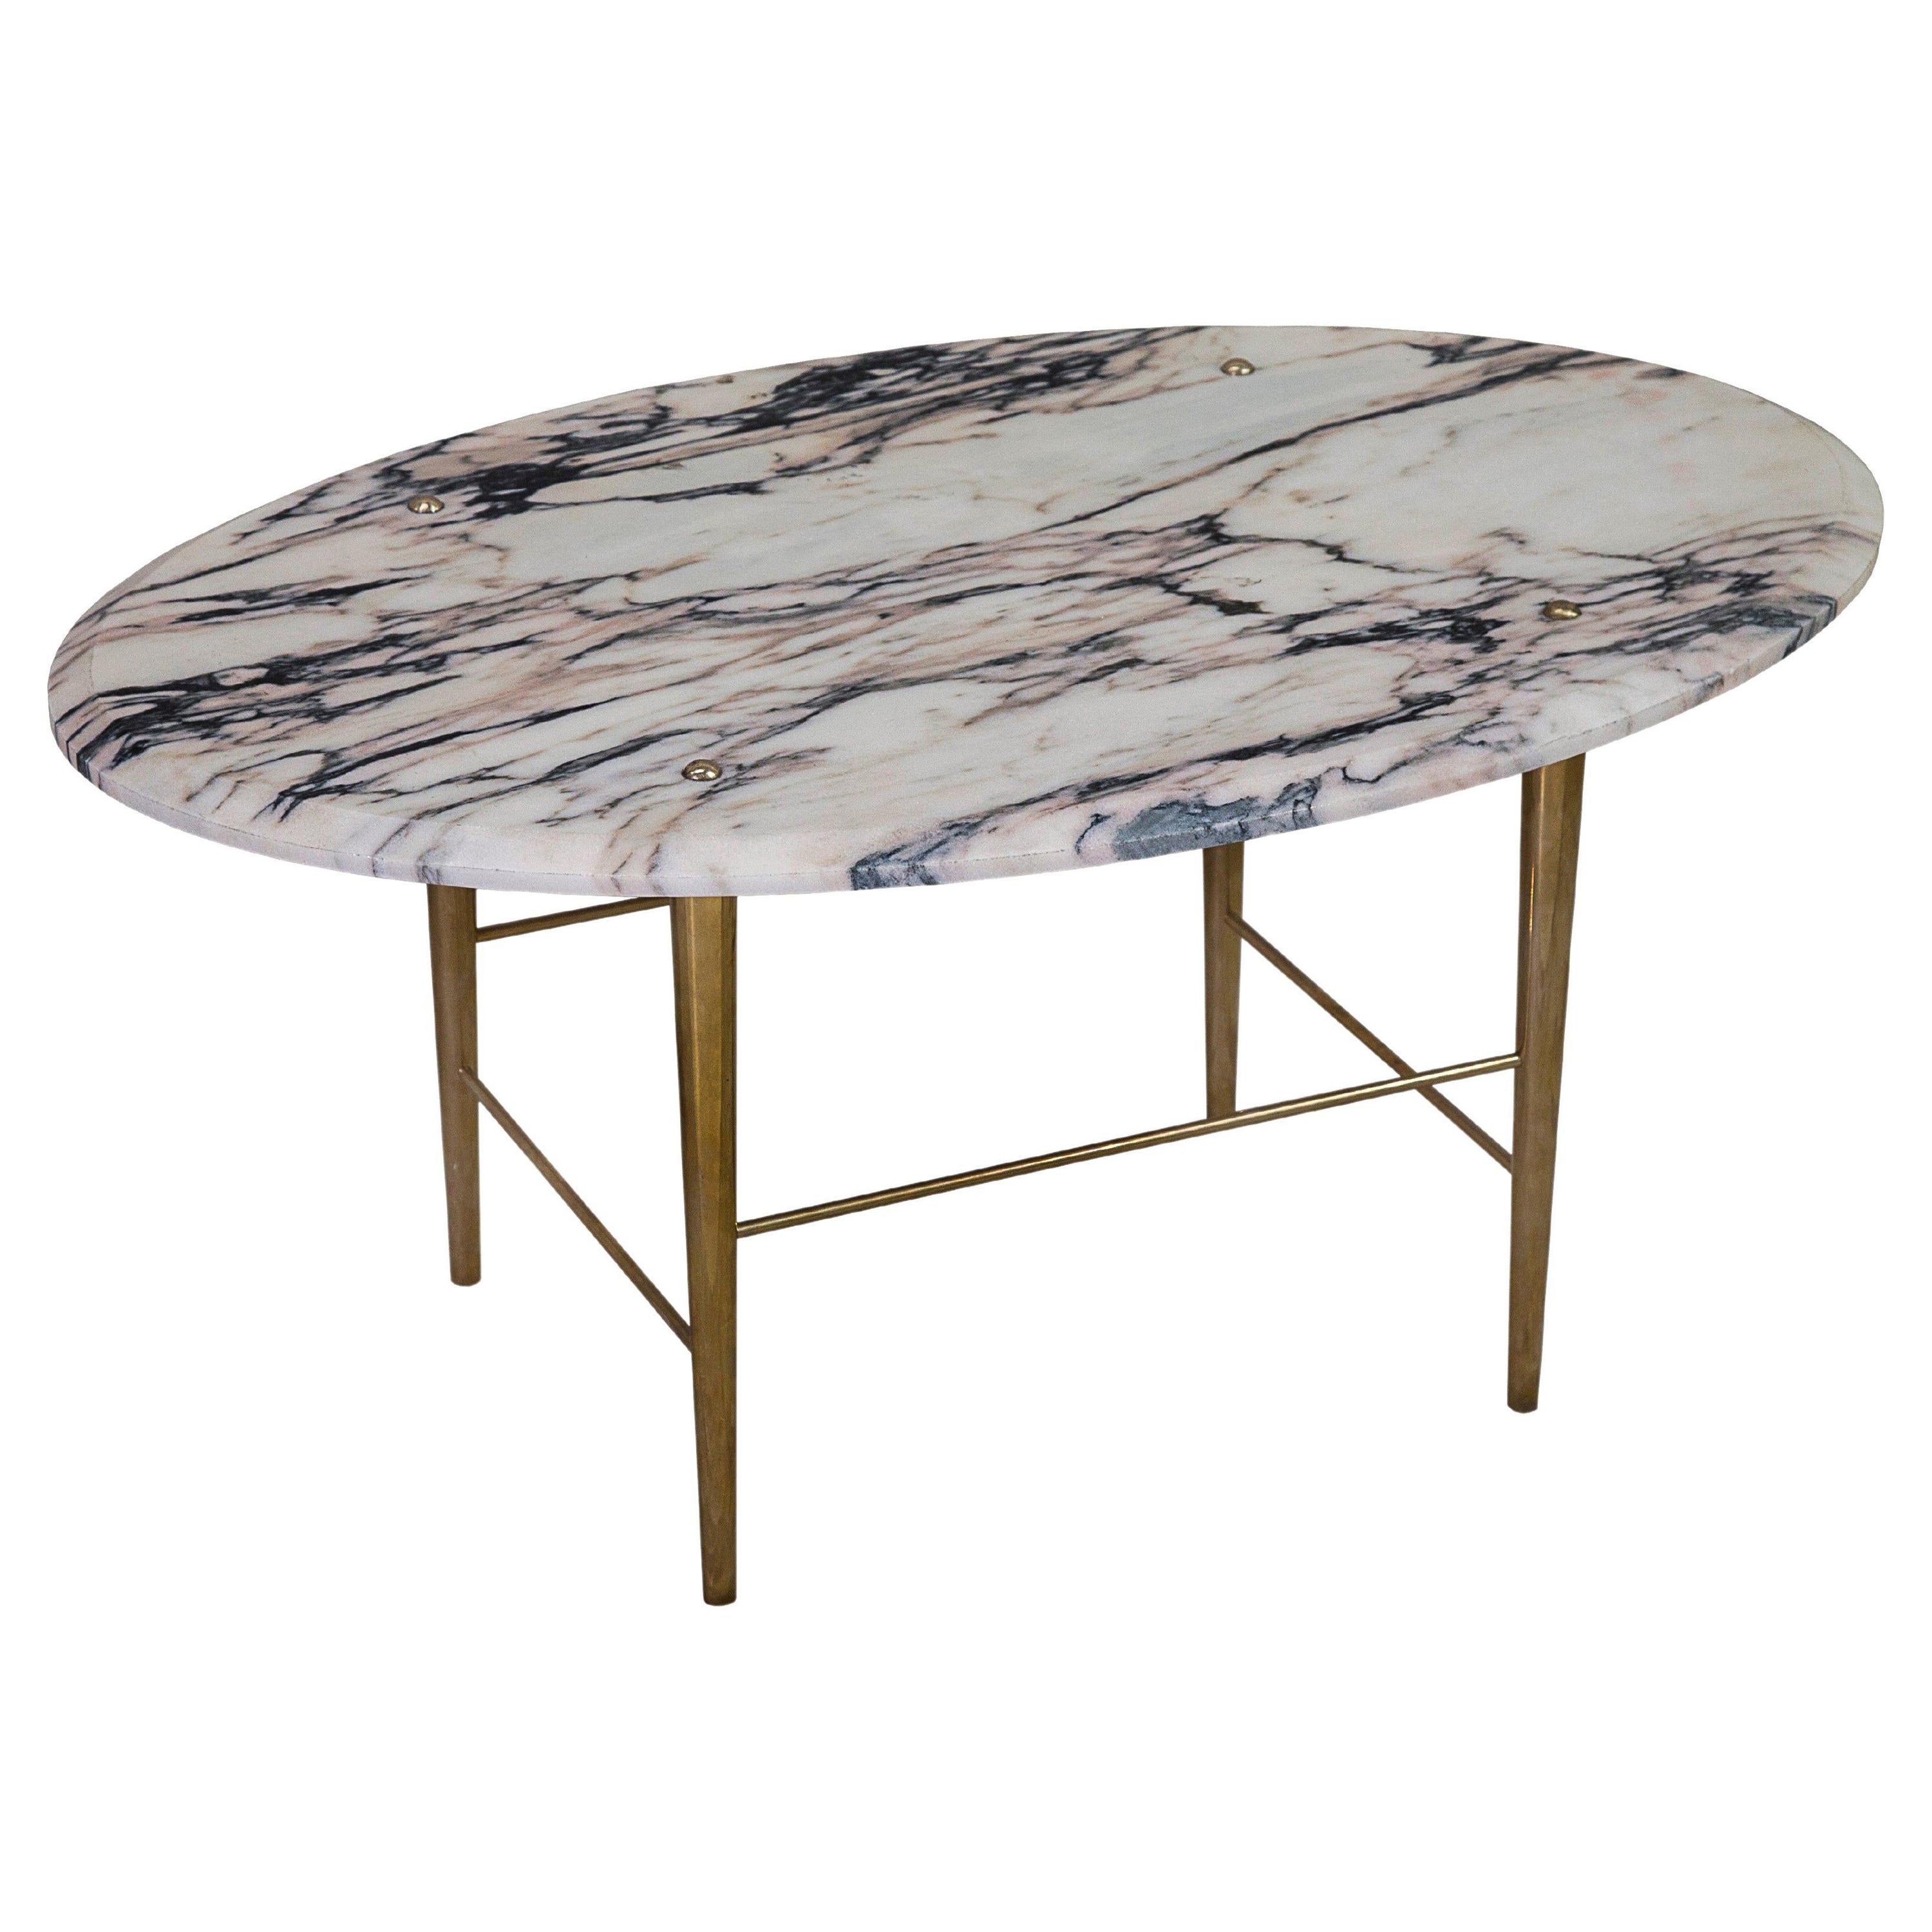 Stud Coffee Table in Vulcanatta Marble and Polished Brass — Large For Sale